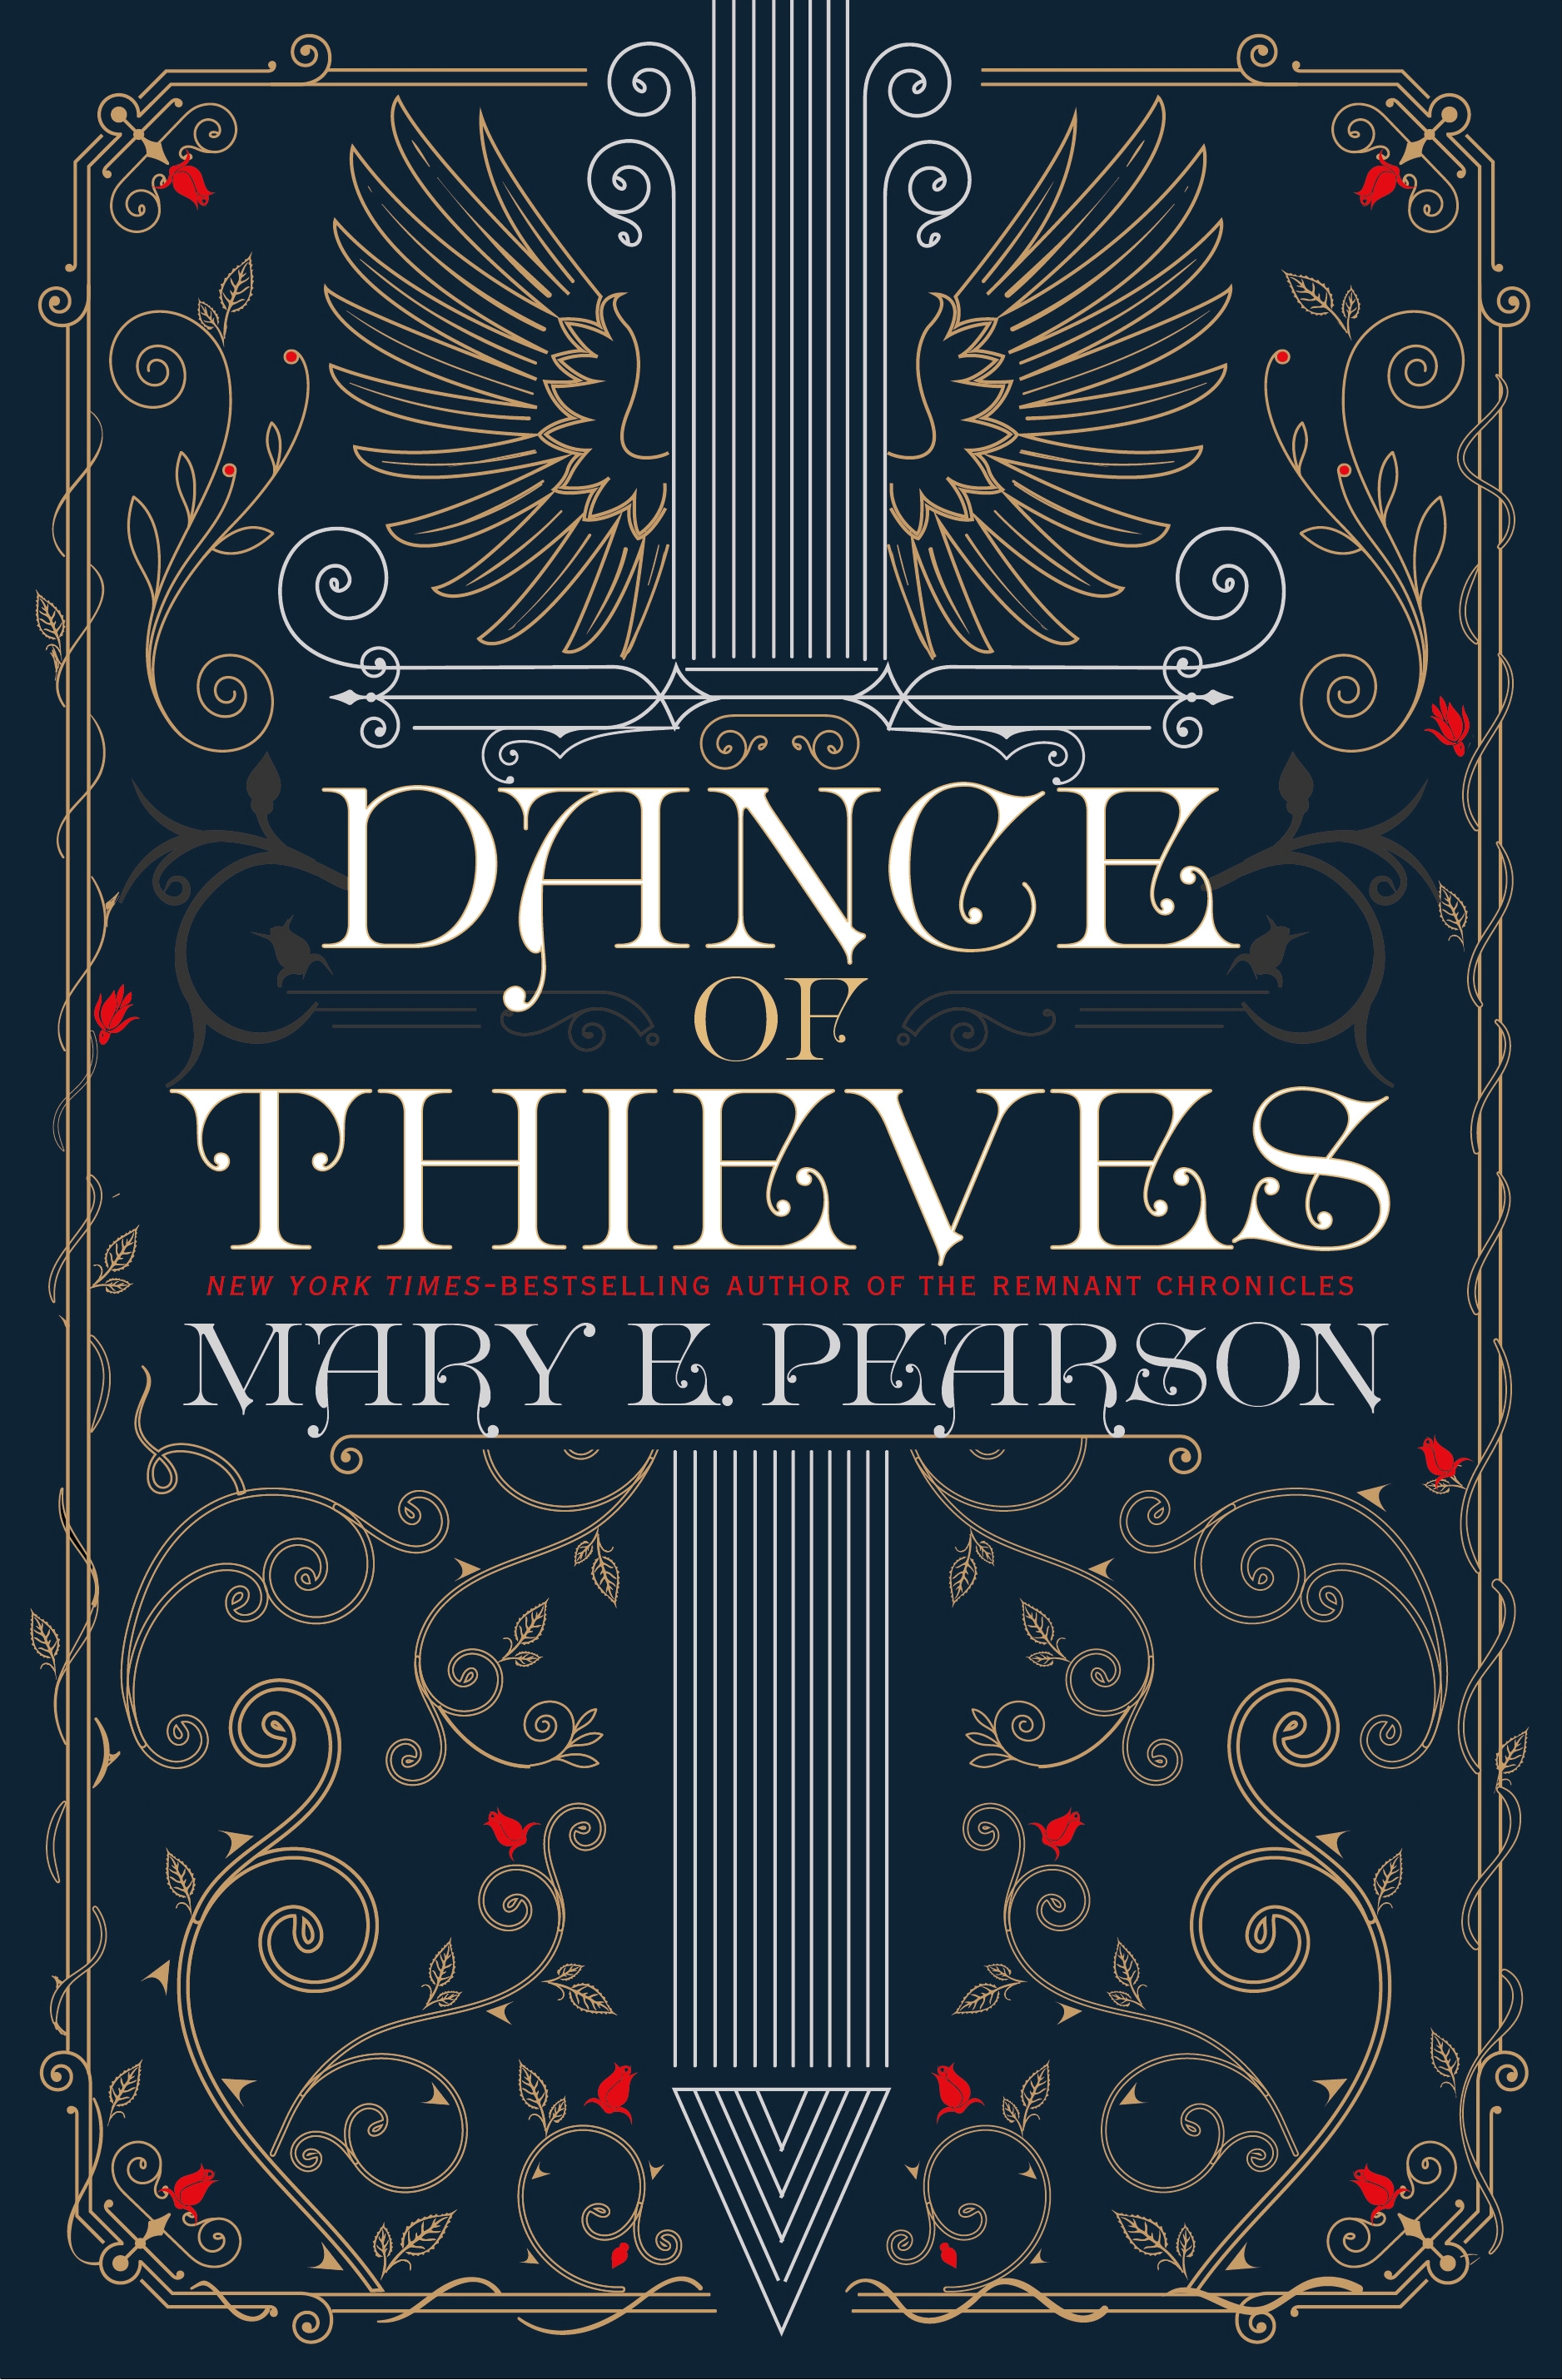 Dance of thieves cover image